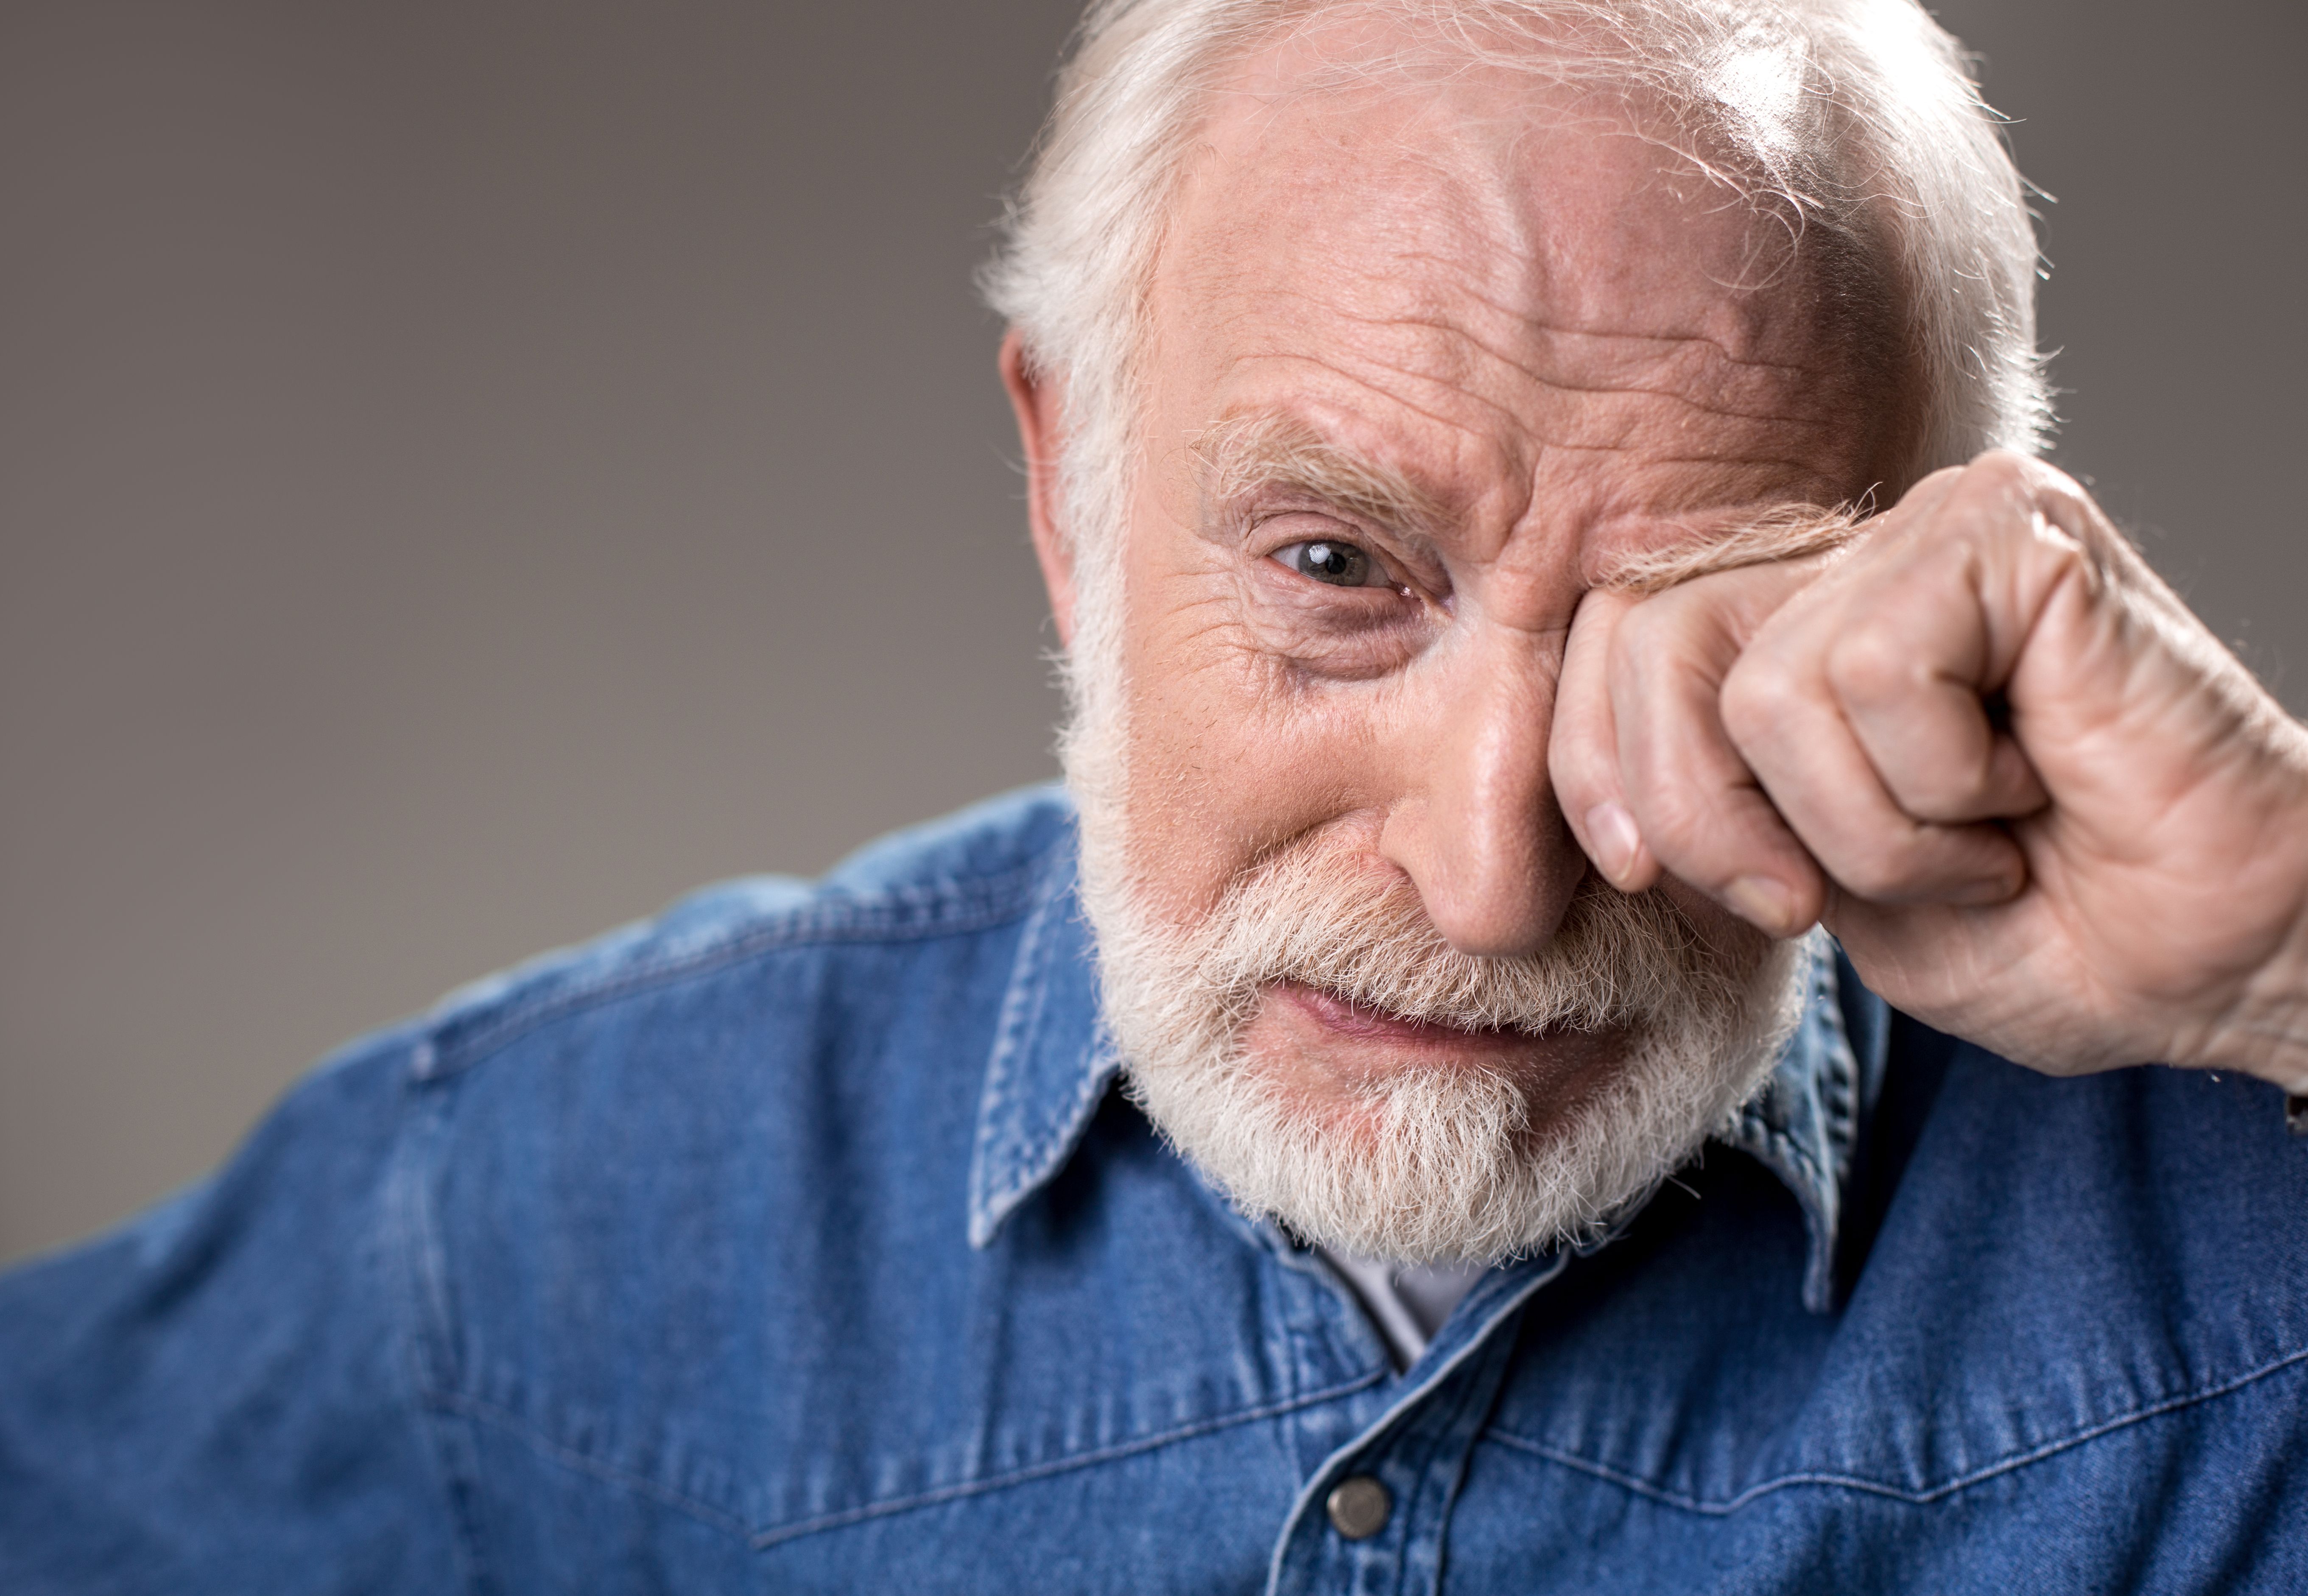 A crying old man | Source: Shutterstock